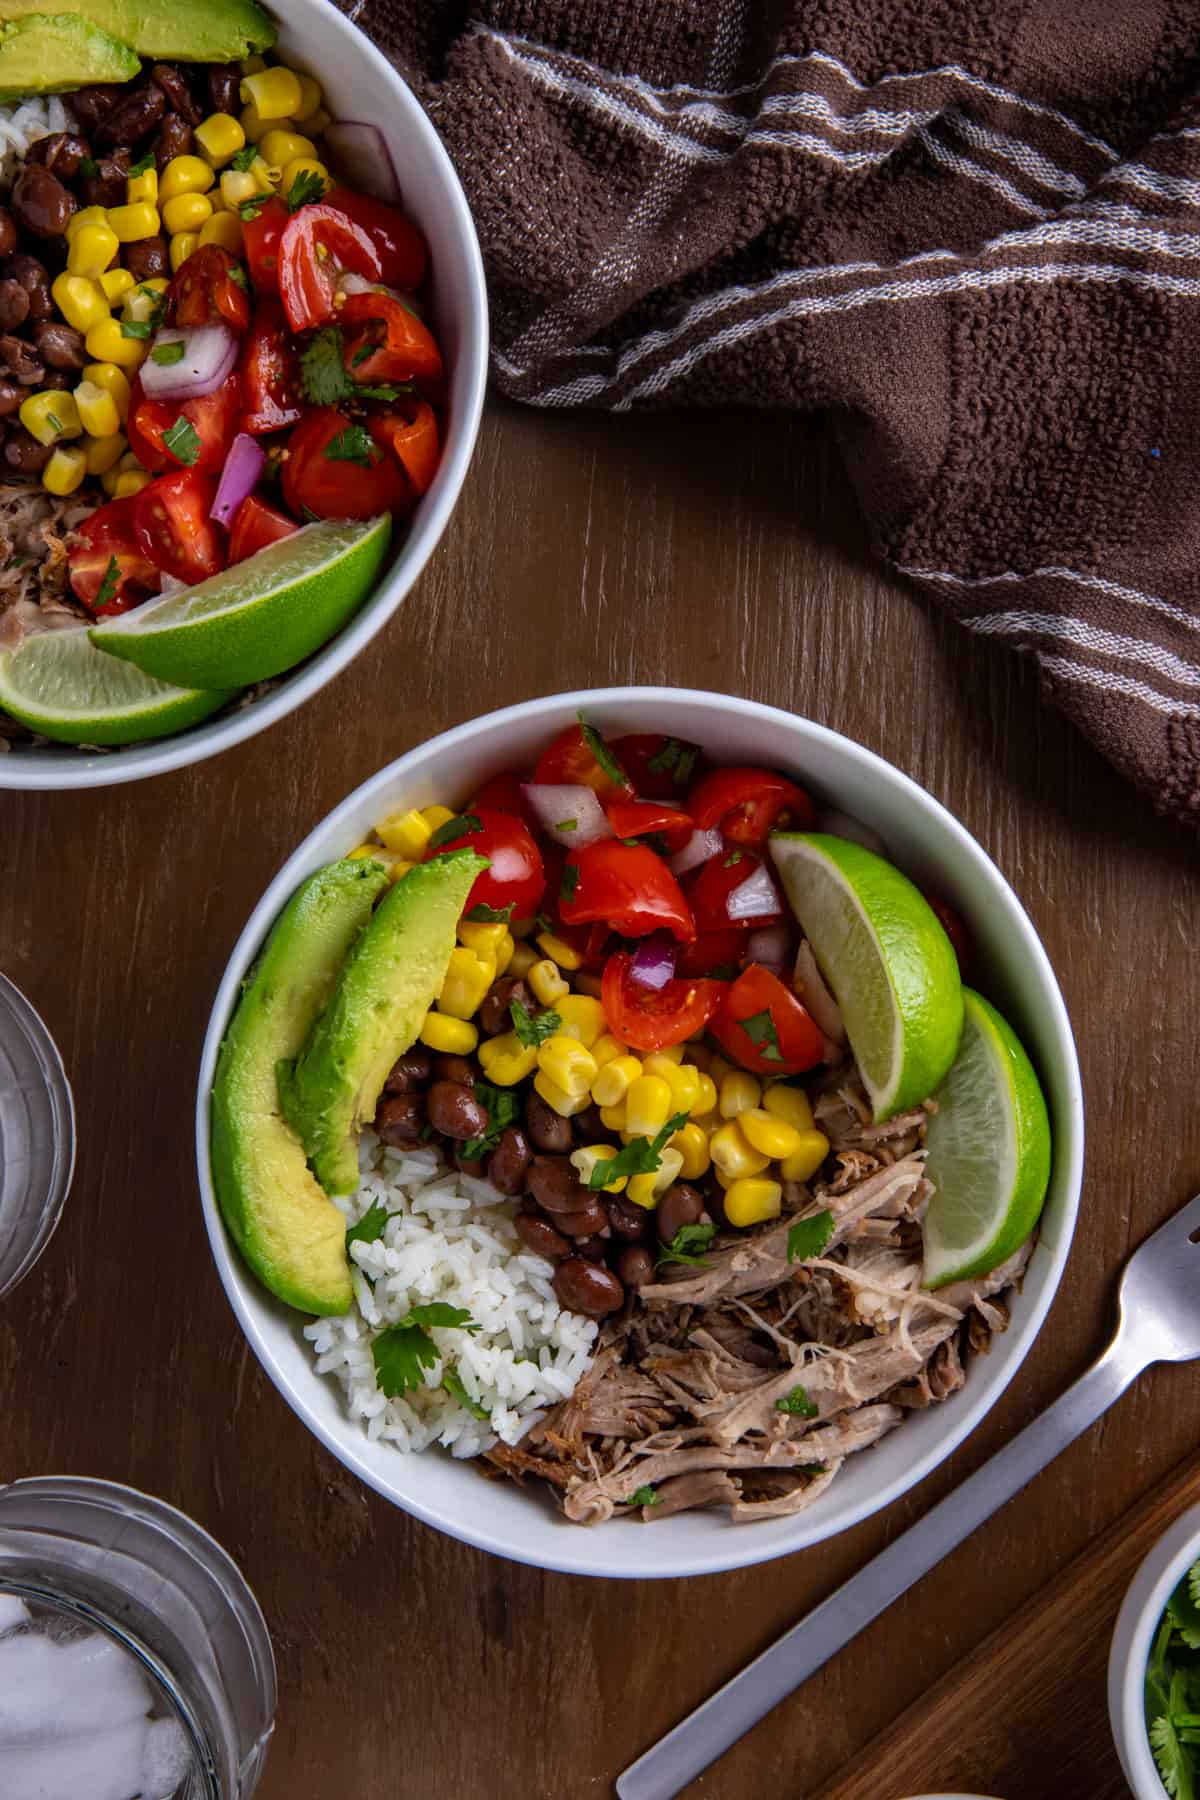 Two white bowl filled with pork carnitas, black beans, corn, salsa, garnished with lime slices and avocado wedges.